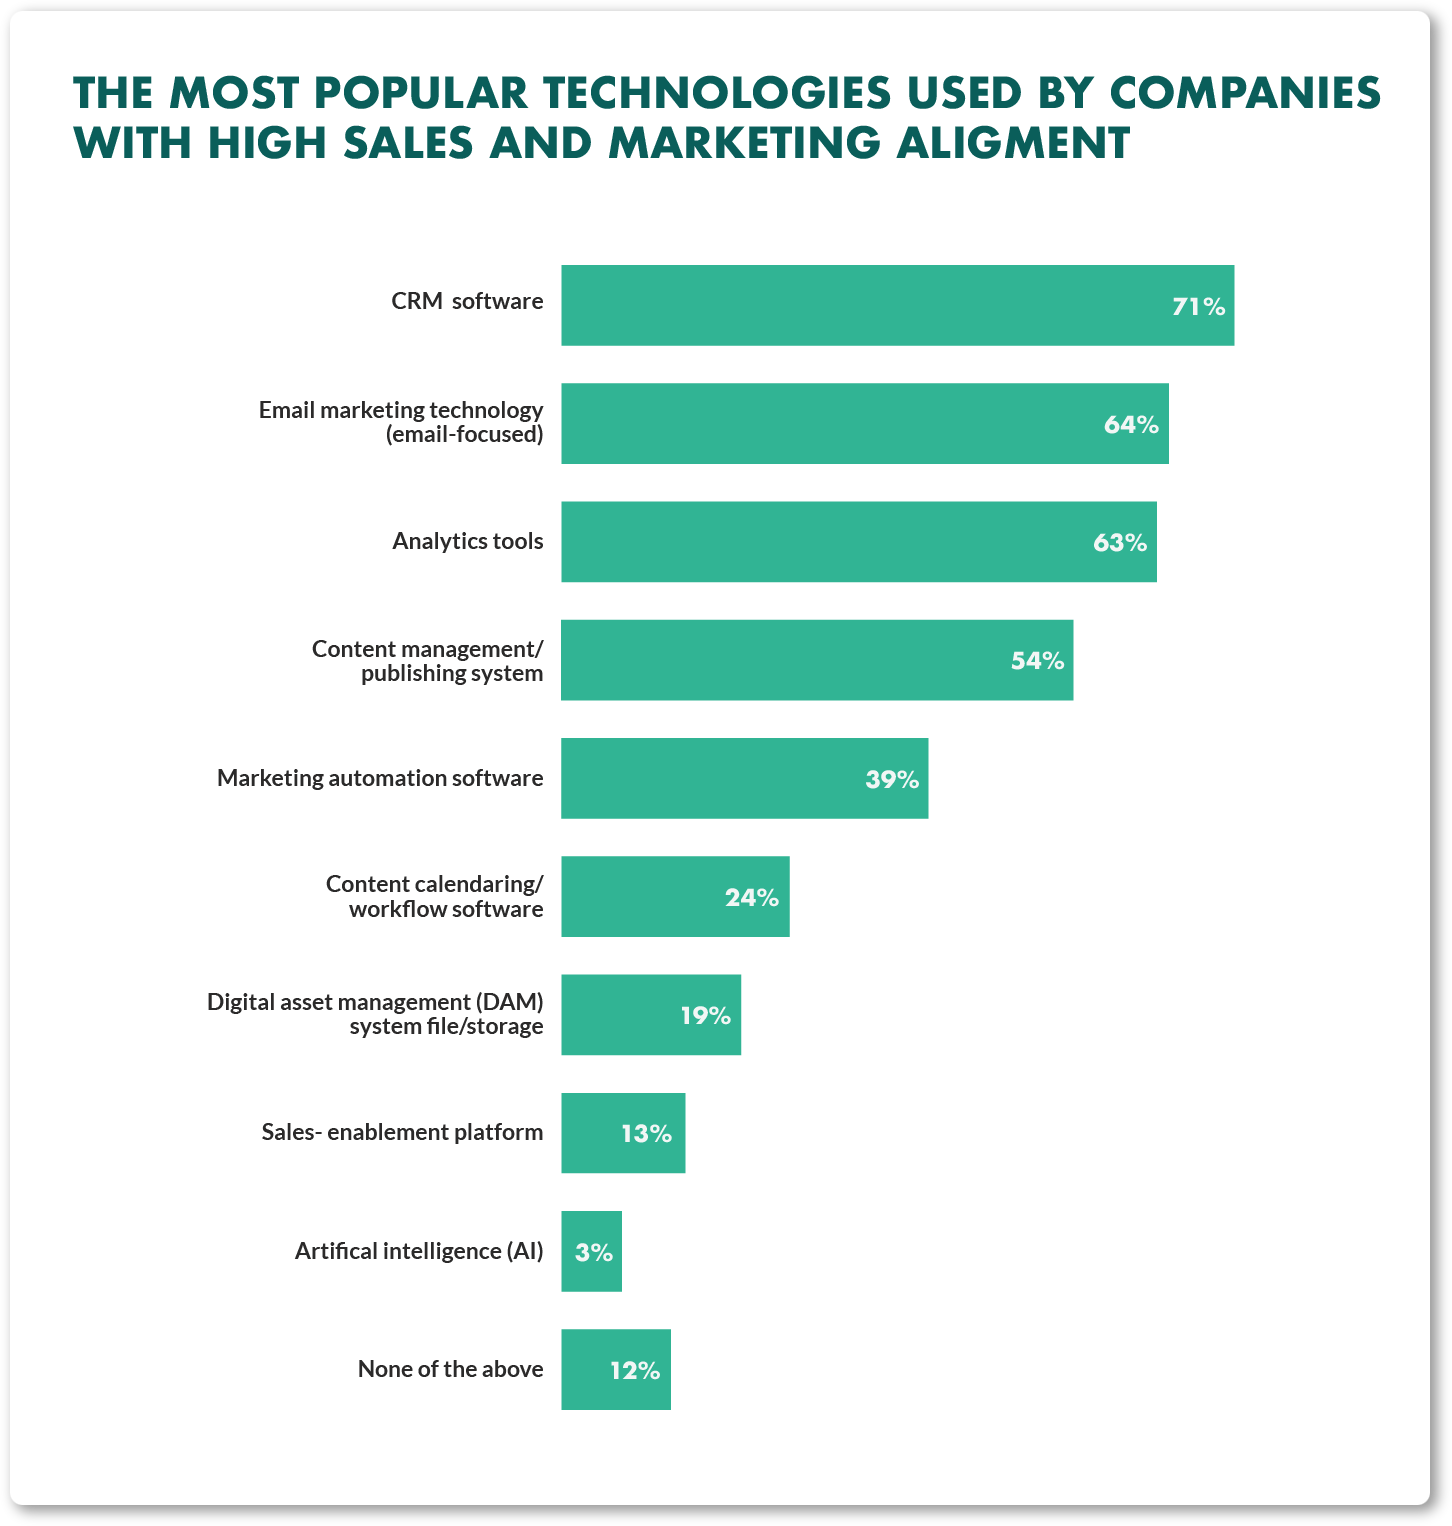 The most popular technologies used by companies with sales and marketing alignment